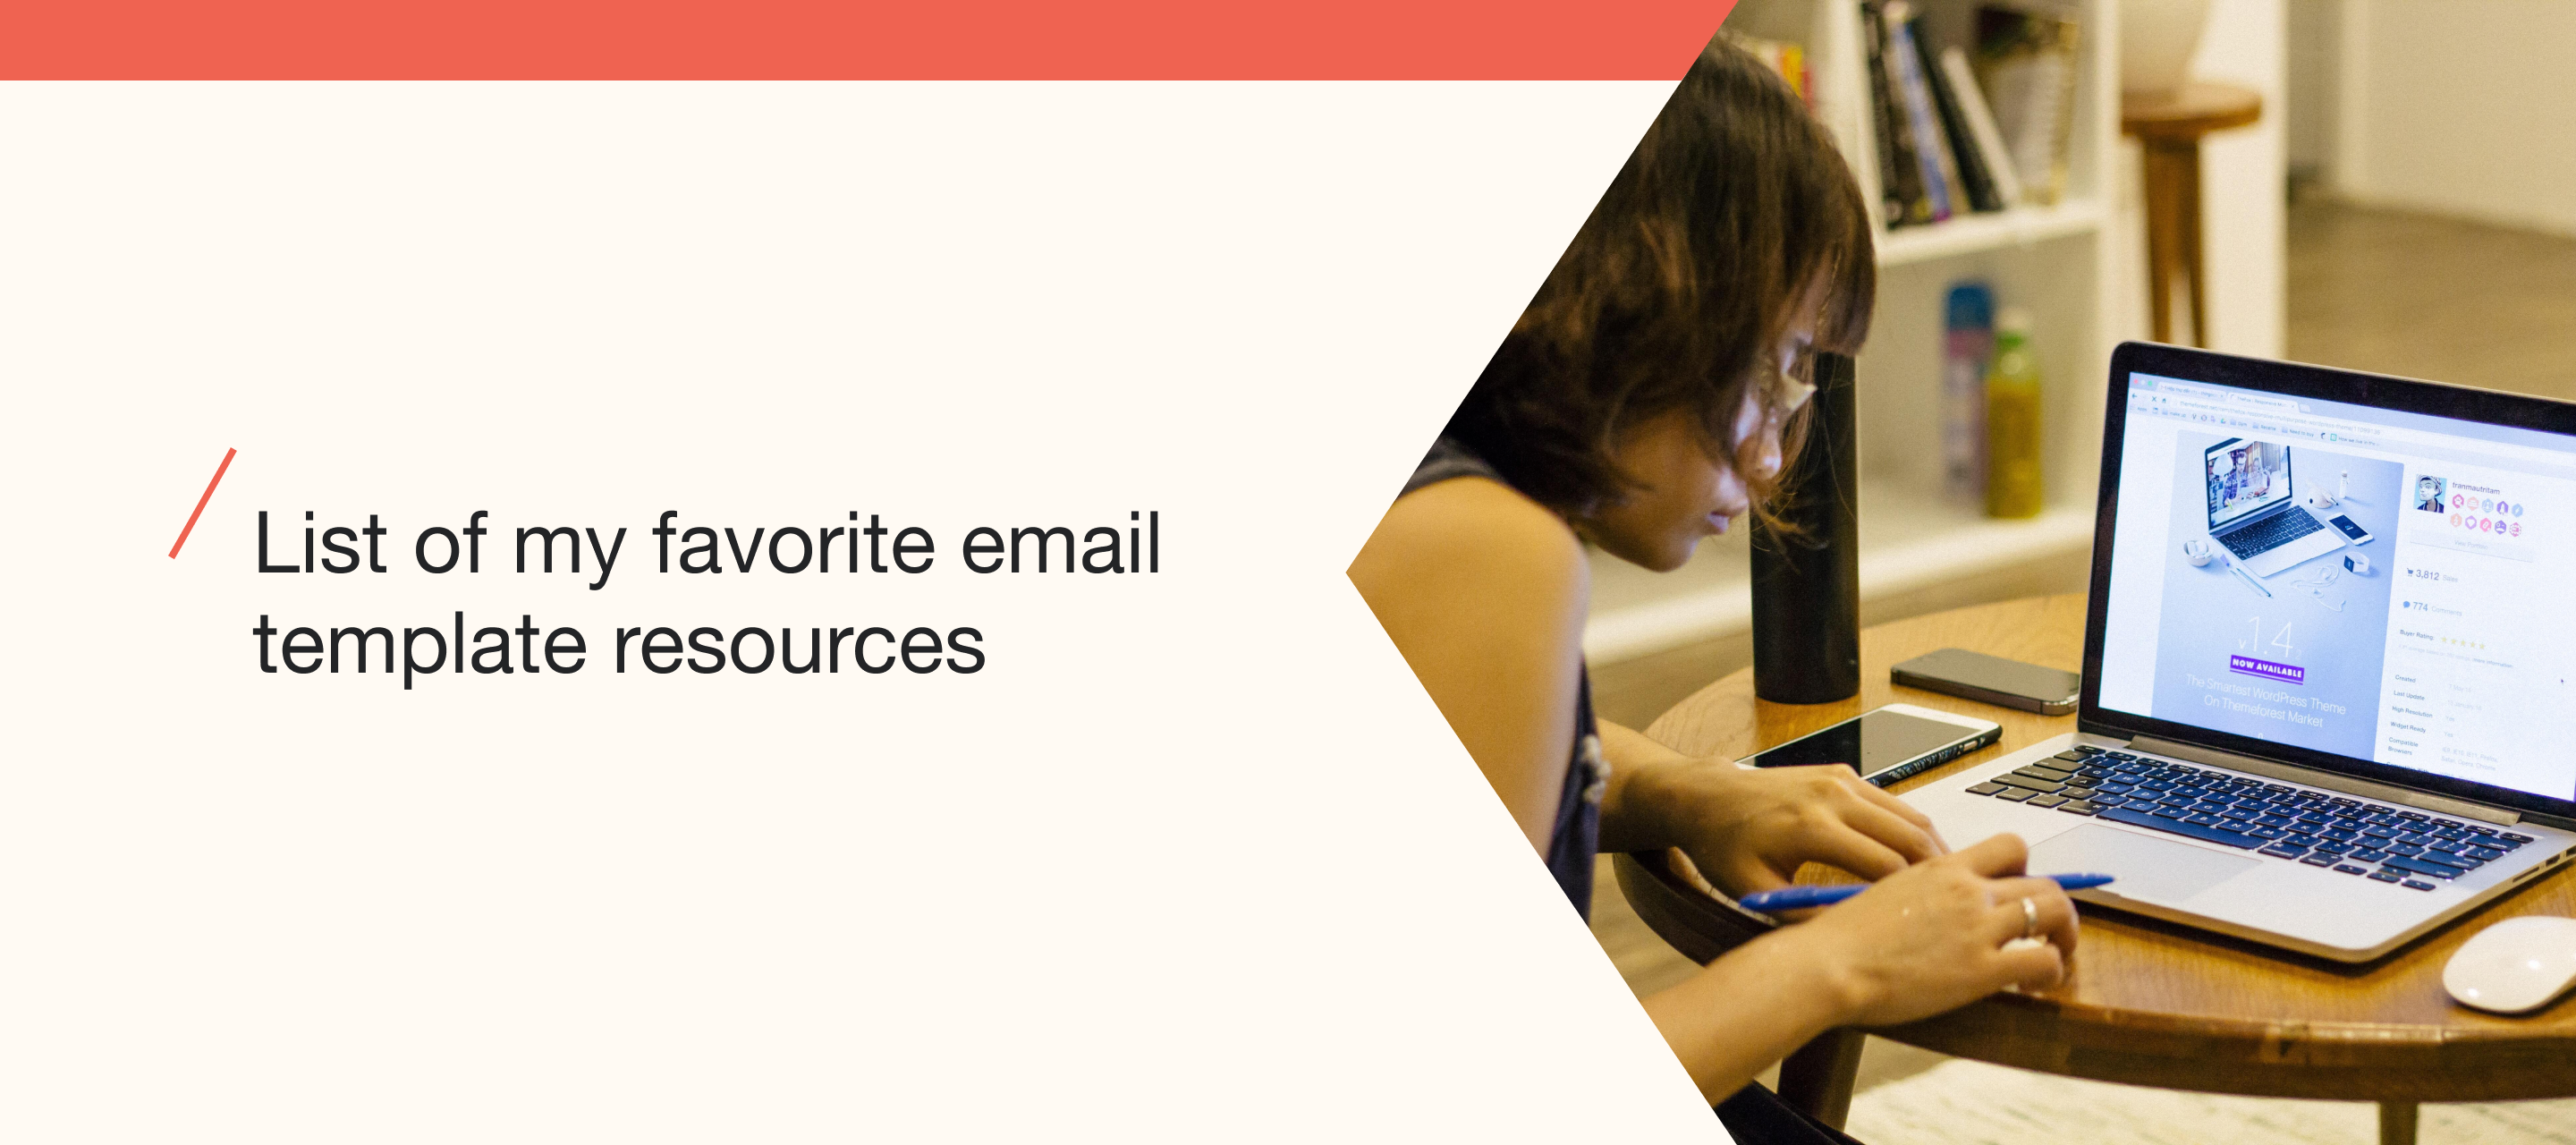 List of my favorite email template resources